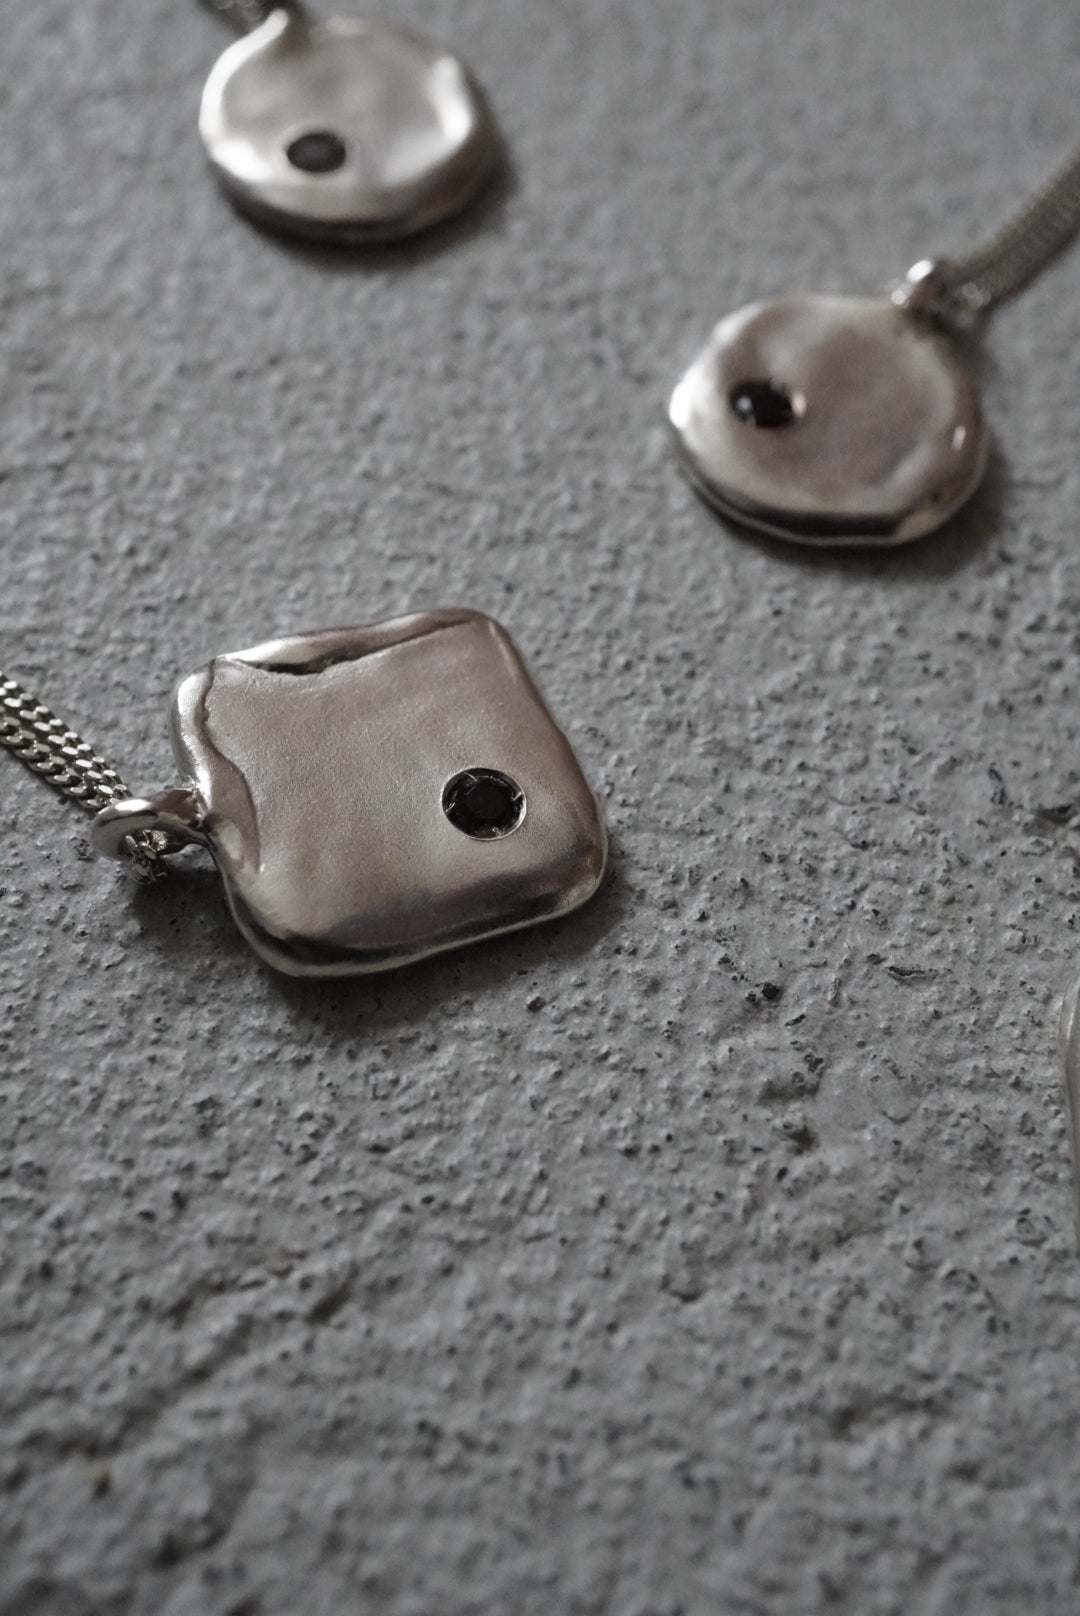 Square nacklace with a stone